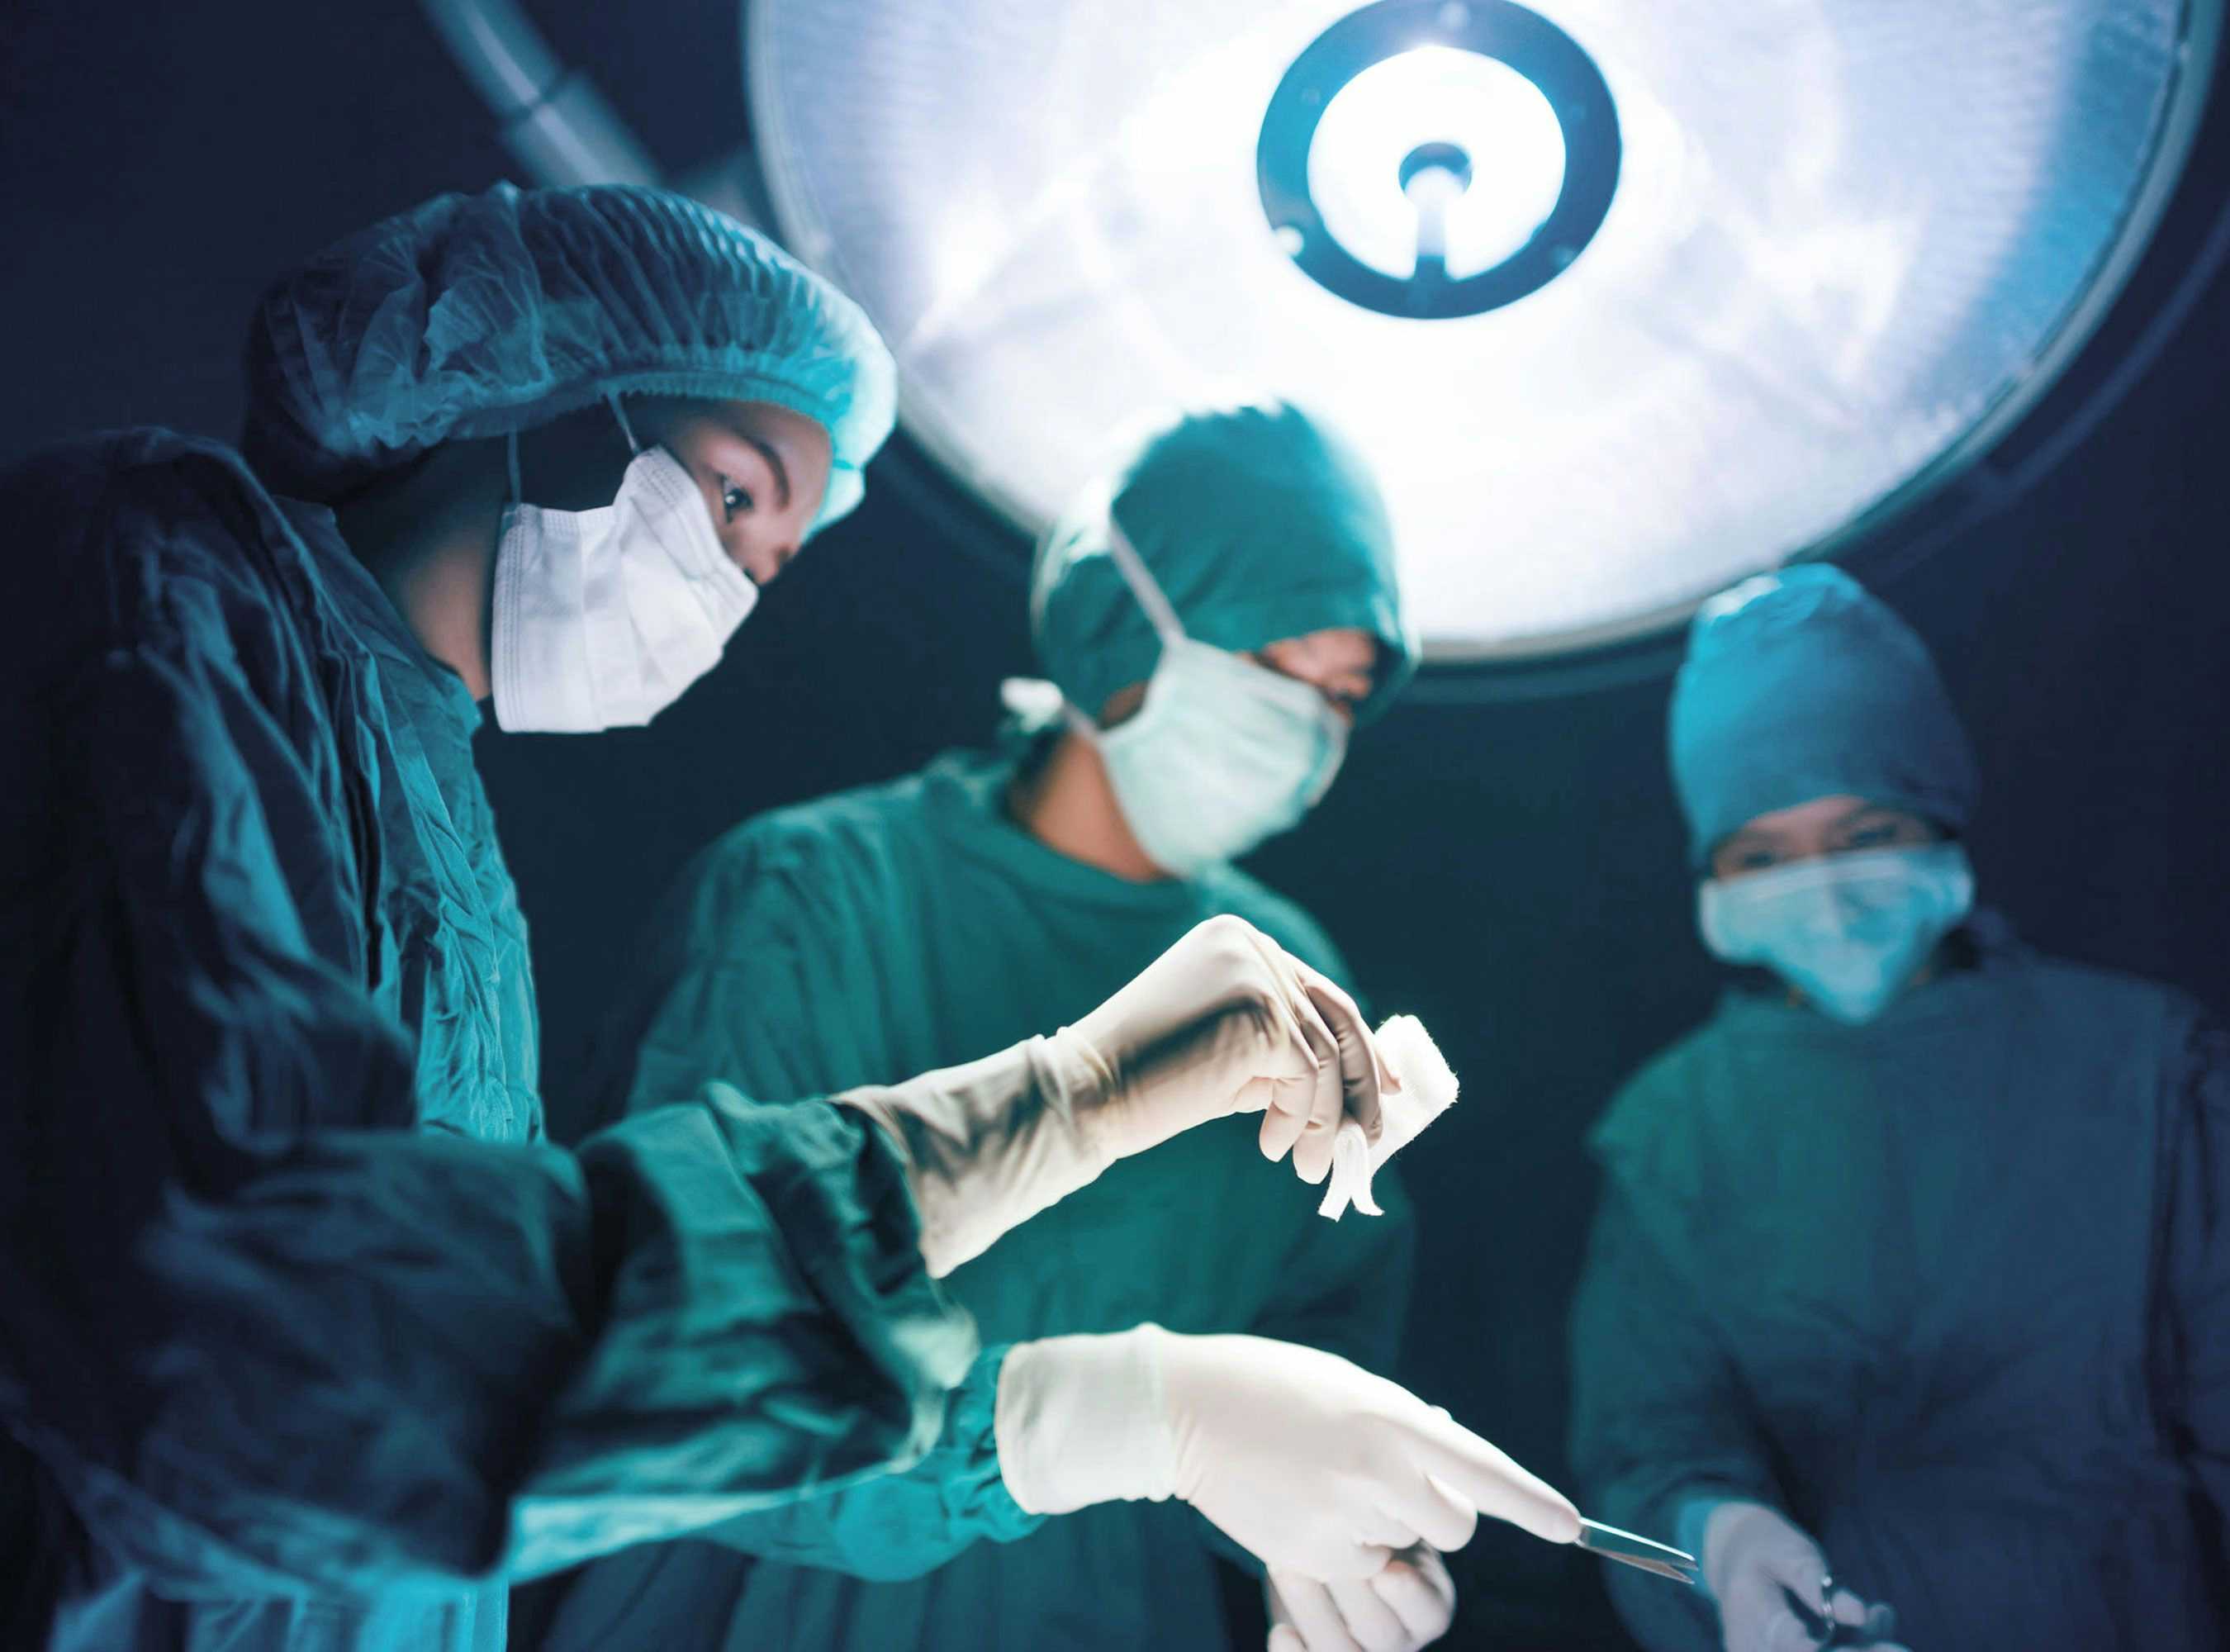 Delay in Surgical Repair Leads to Patient Death